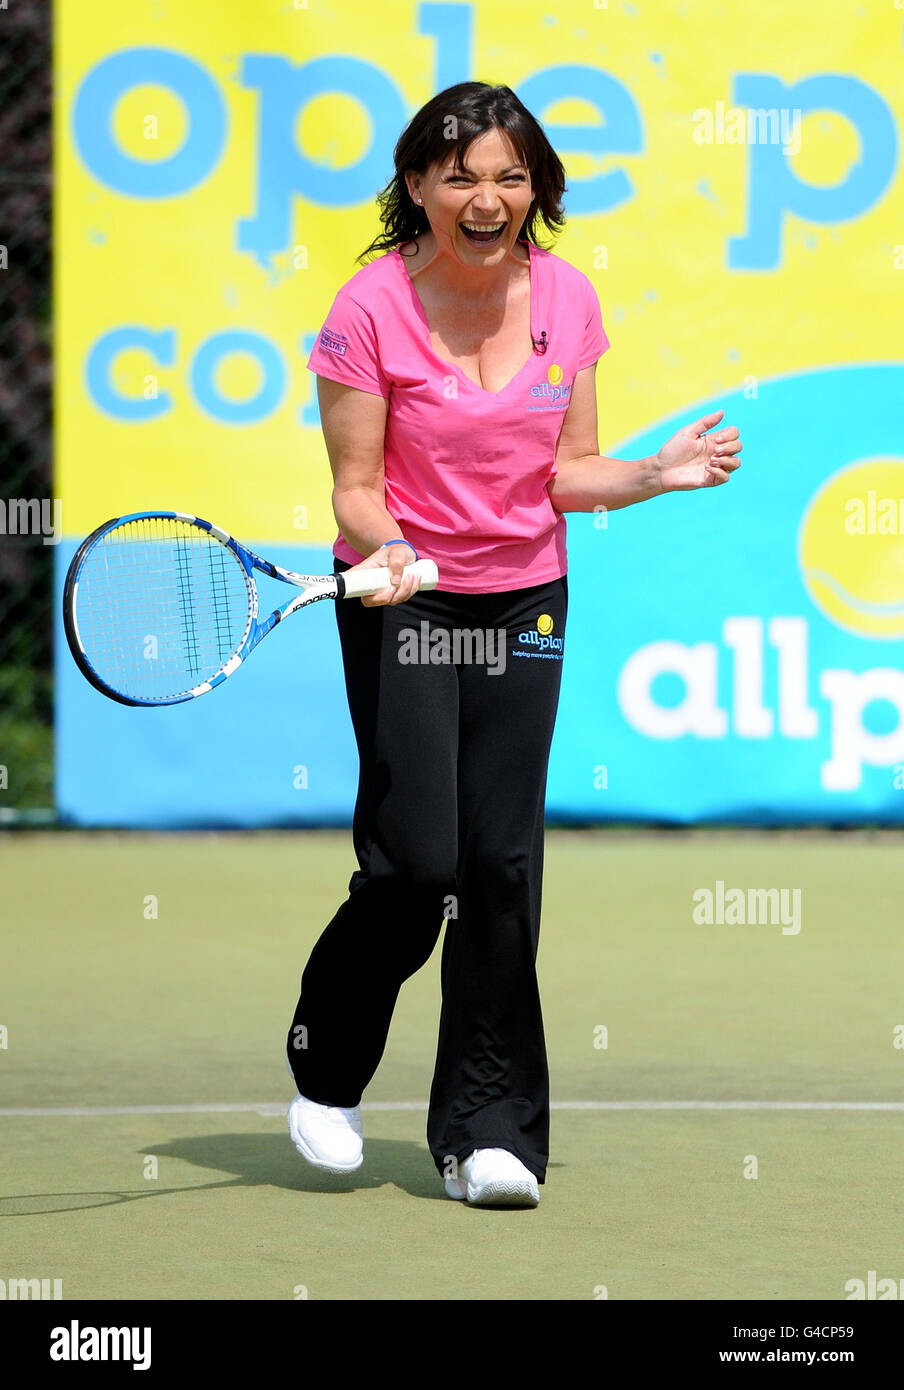 Lorraine Kelly plays tennis during the Lawn Tennis Association's campagne All Play, at Wimbledon Park Tennis Courts, Wimbledon. Stock Photo